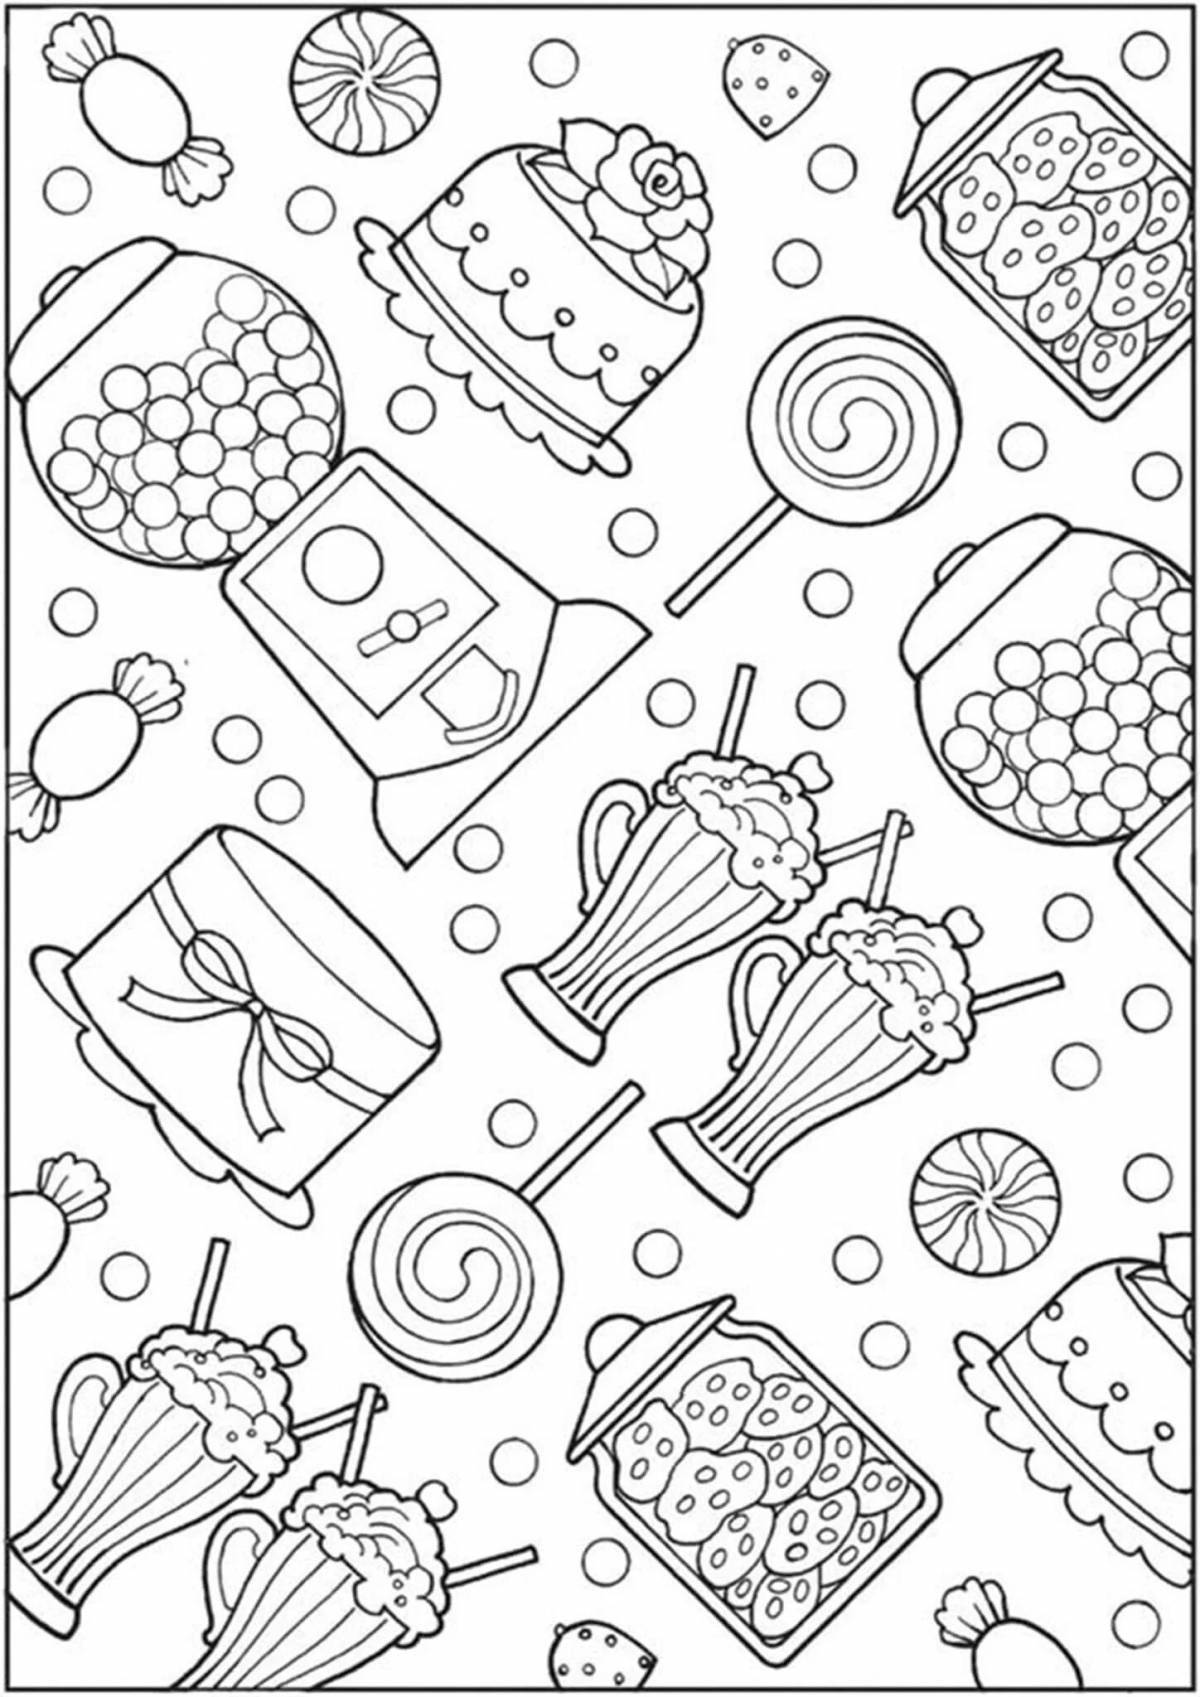 Touching anti-stress food coloring book